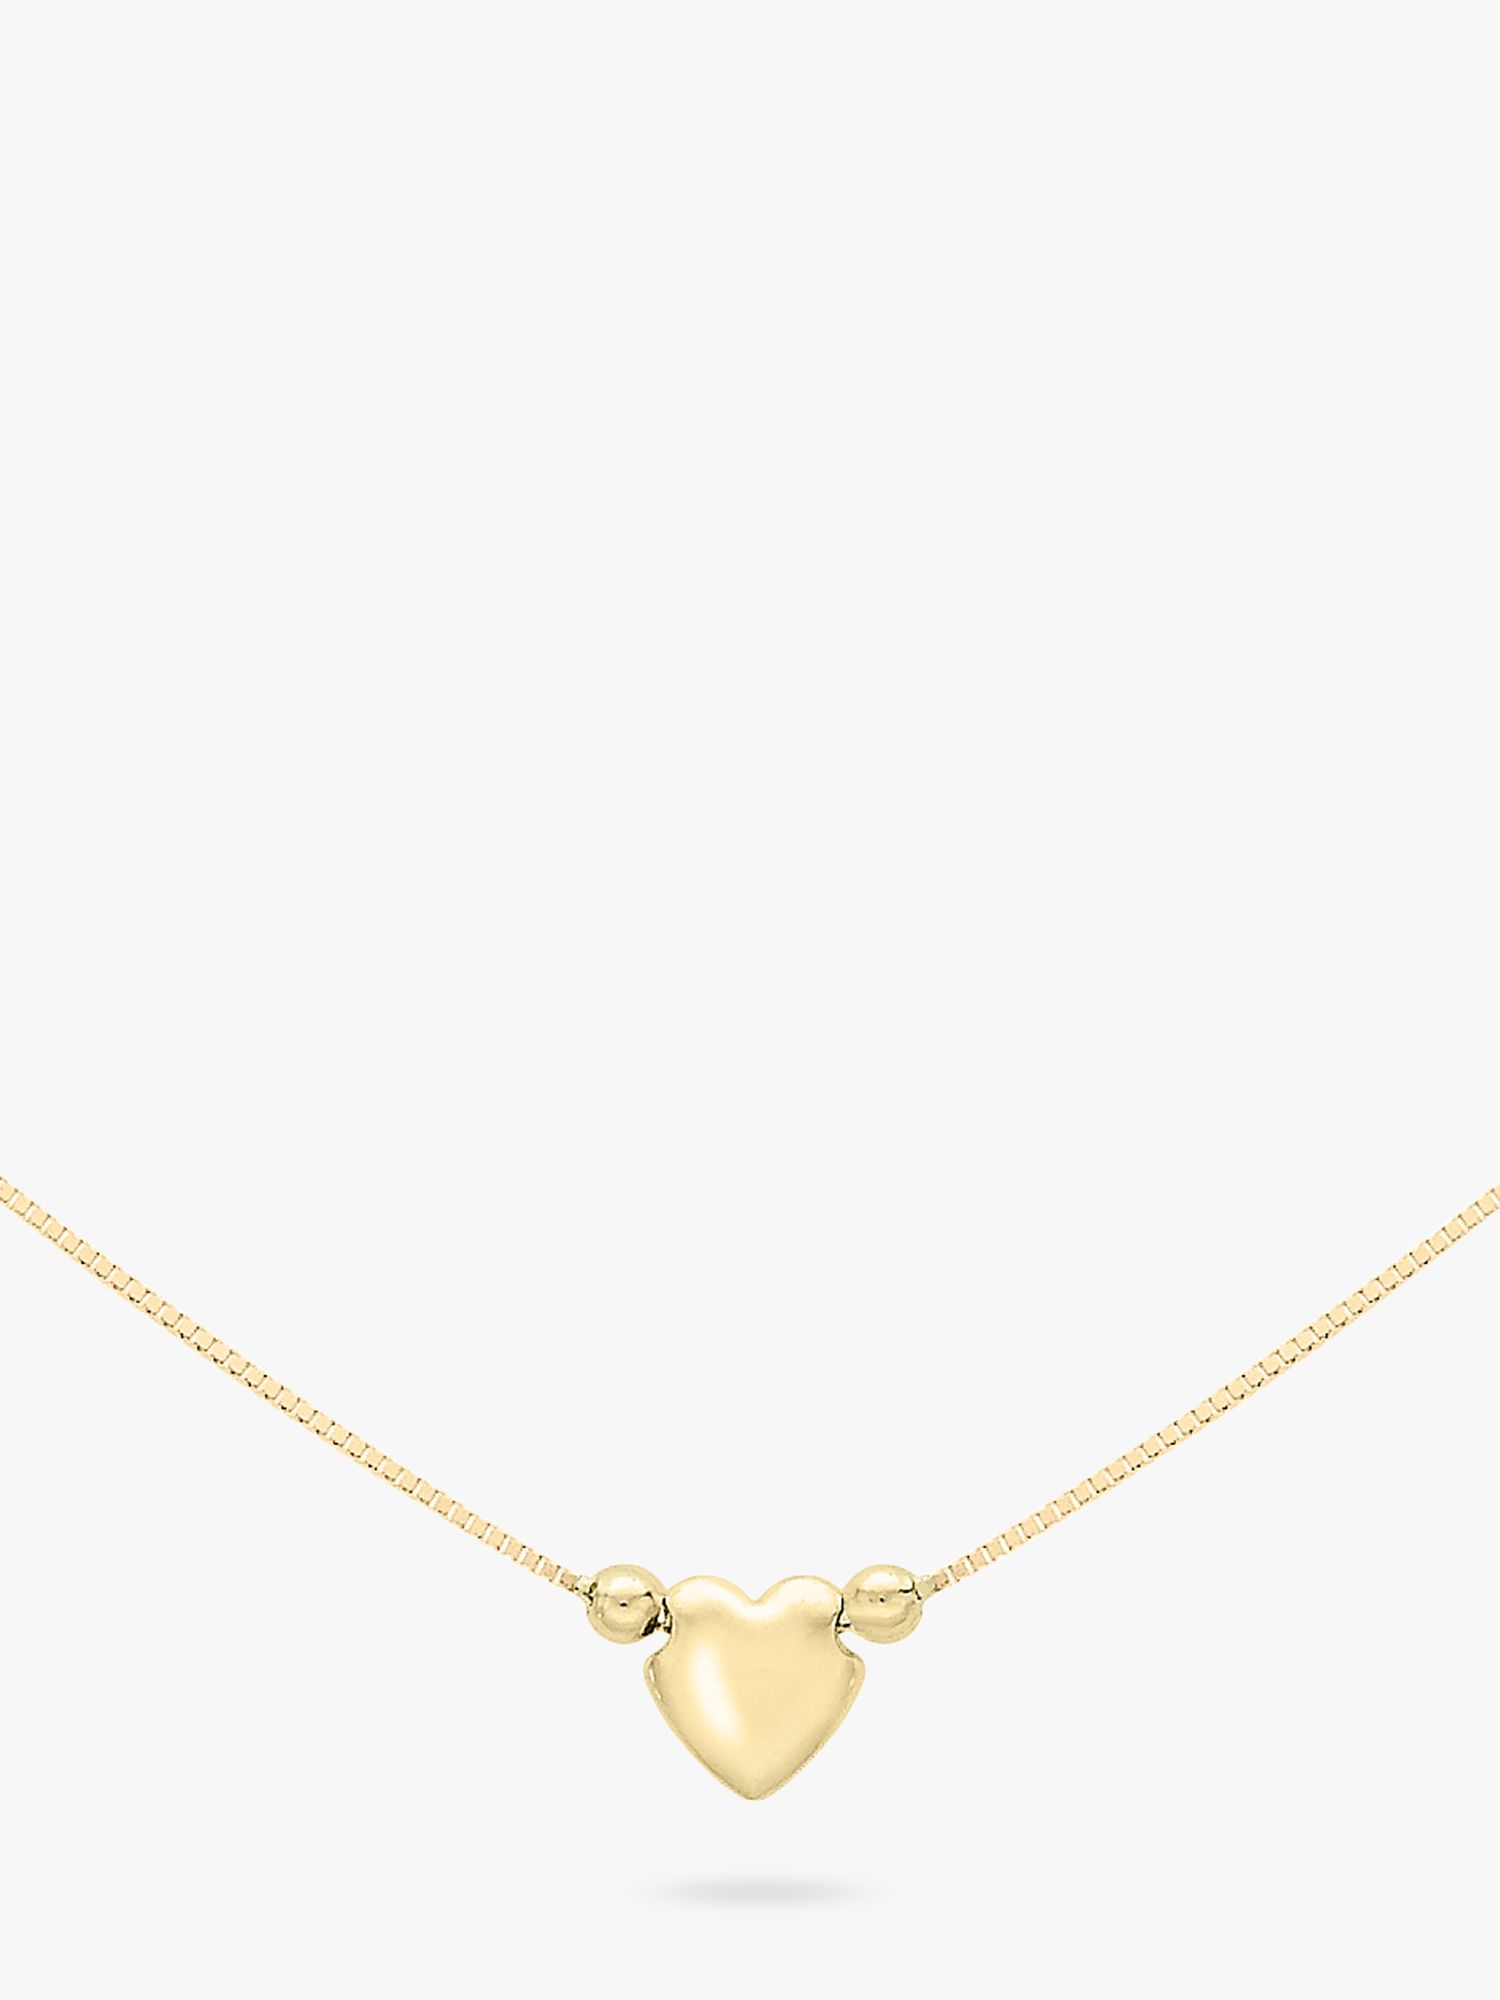 Buy IBB 9ct Yellow Gold Box Chain Heart Necklace and Bracelet Set, Gold Online at johnlewis.com